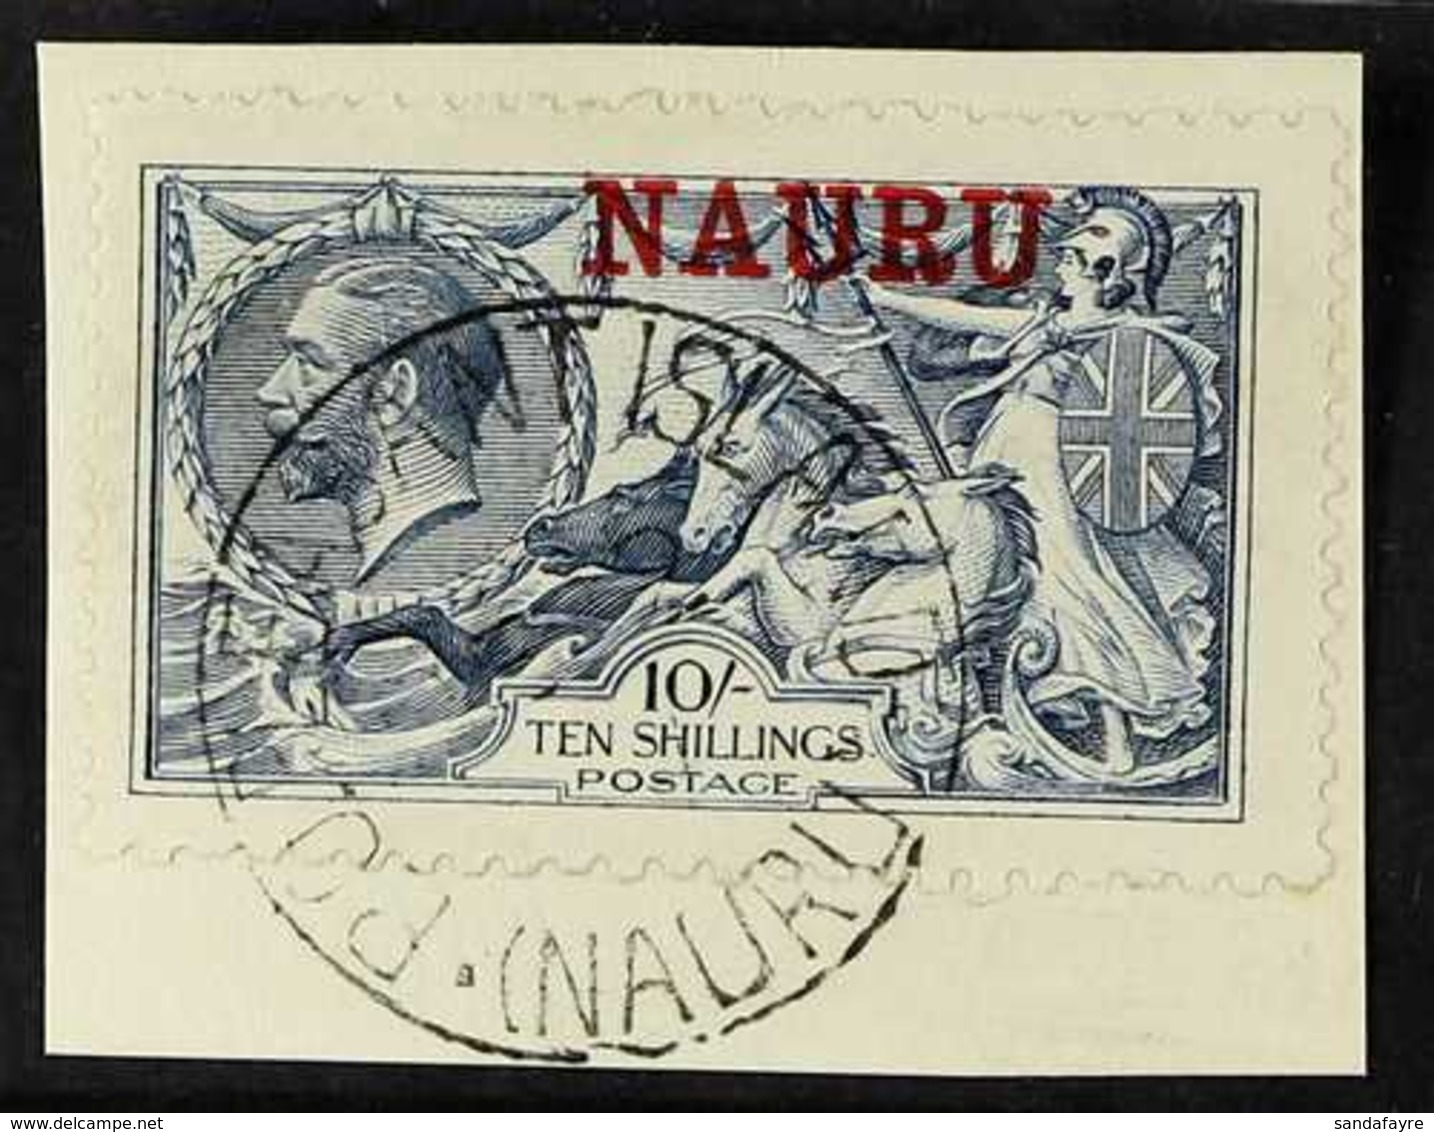 1916 - 23 10s Pale Blue, DLR Seahorse, SG 23, Superb Used On Piece With Central PO Pleasant Island Cds Cancel. For More  - Nauru